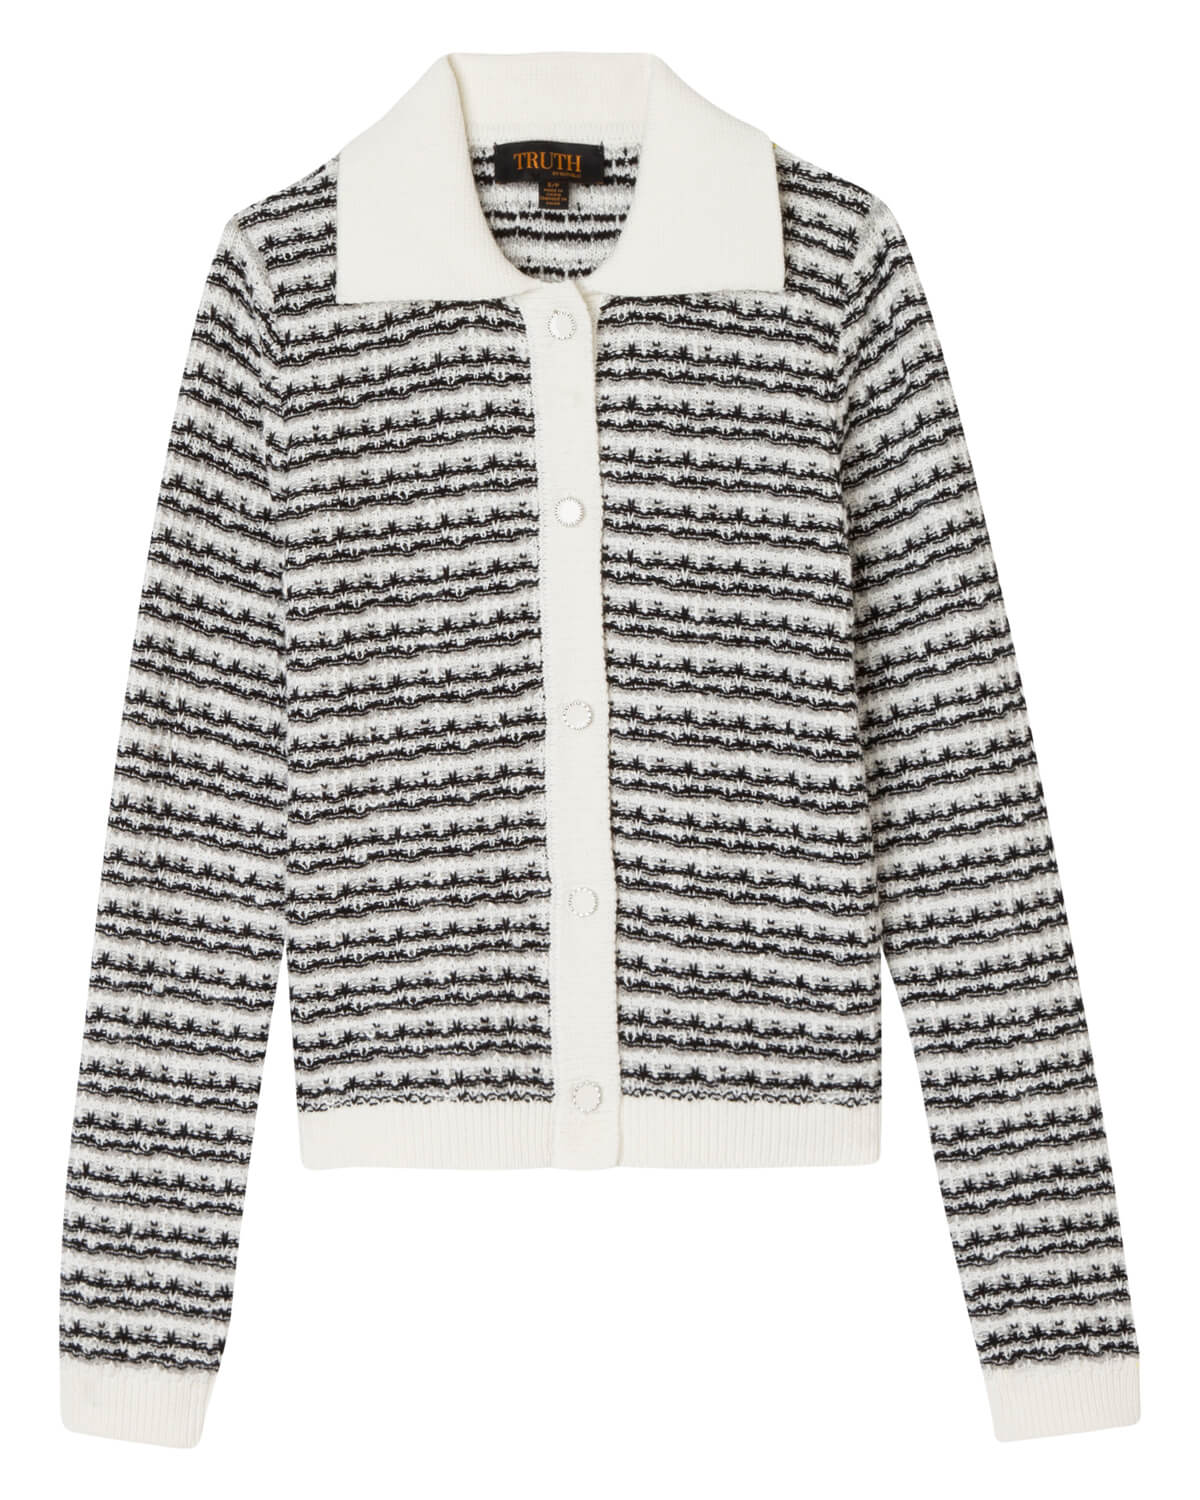 Truth Women's Button Front Sweater Polo Jacket | JANE + MERCER